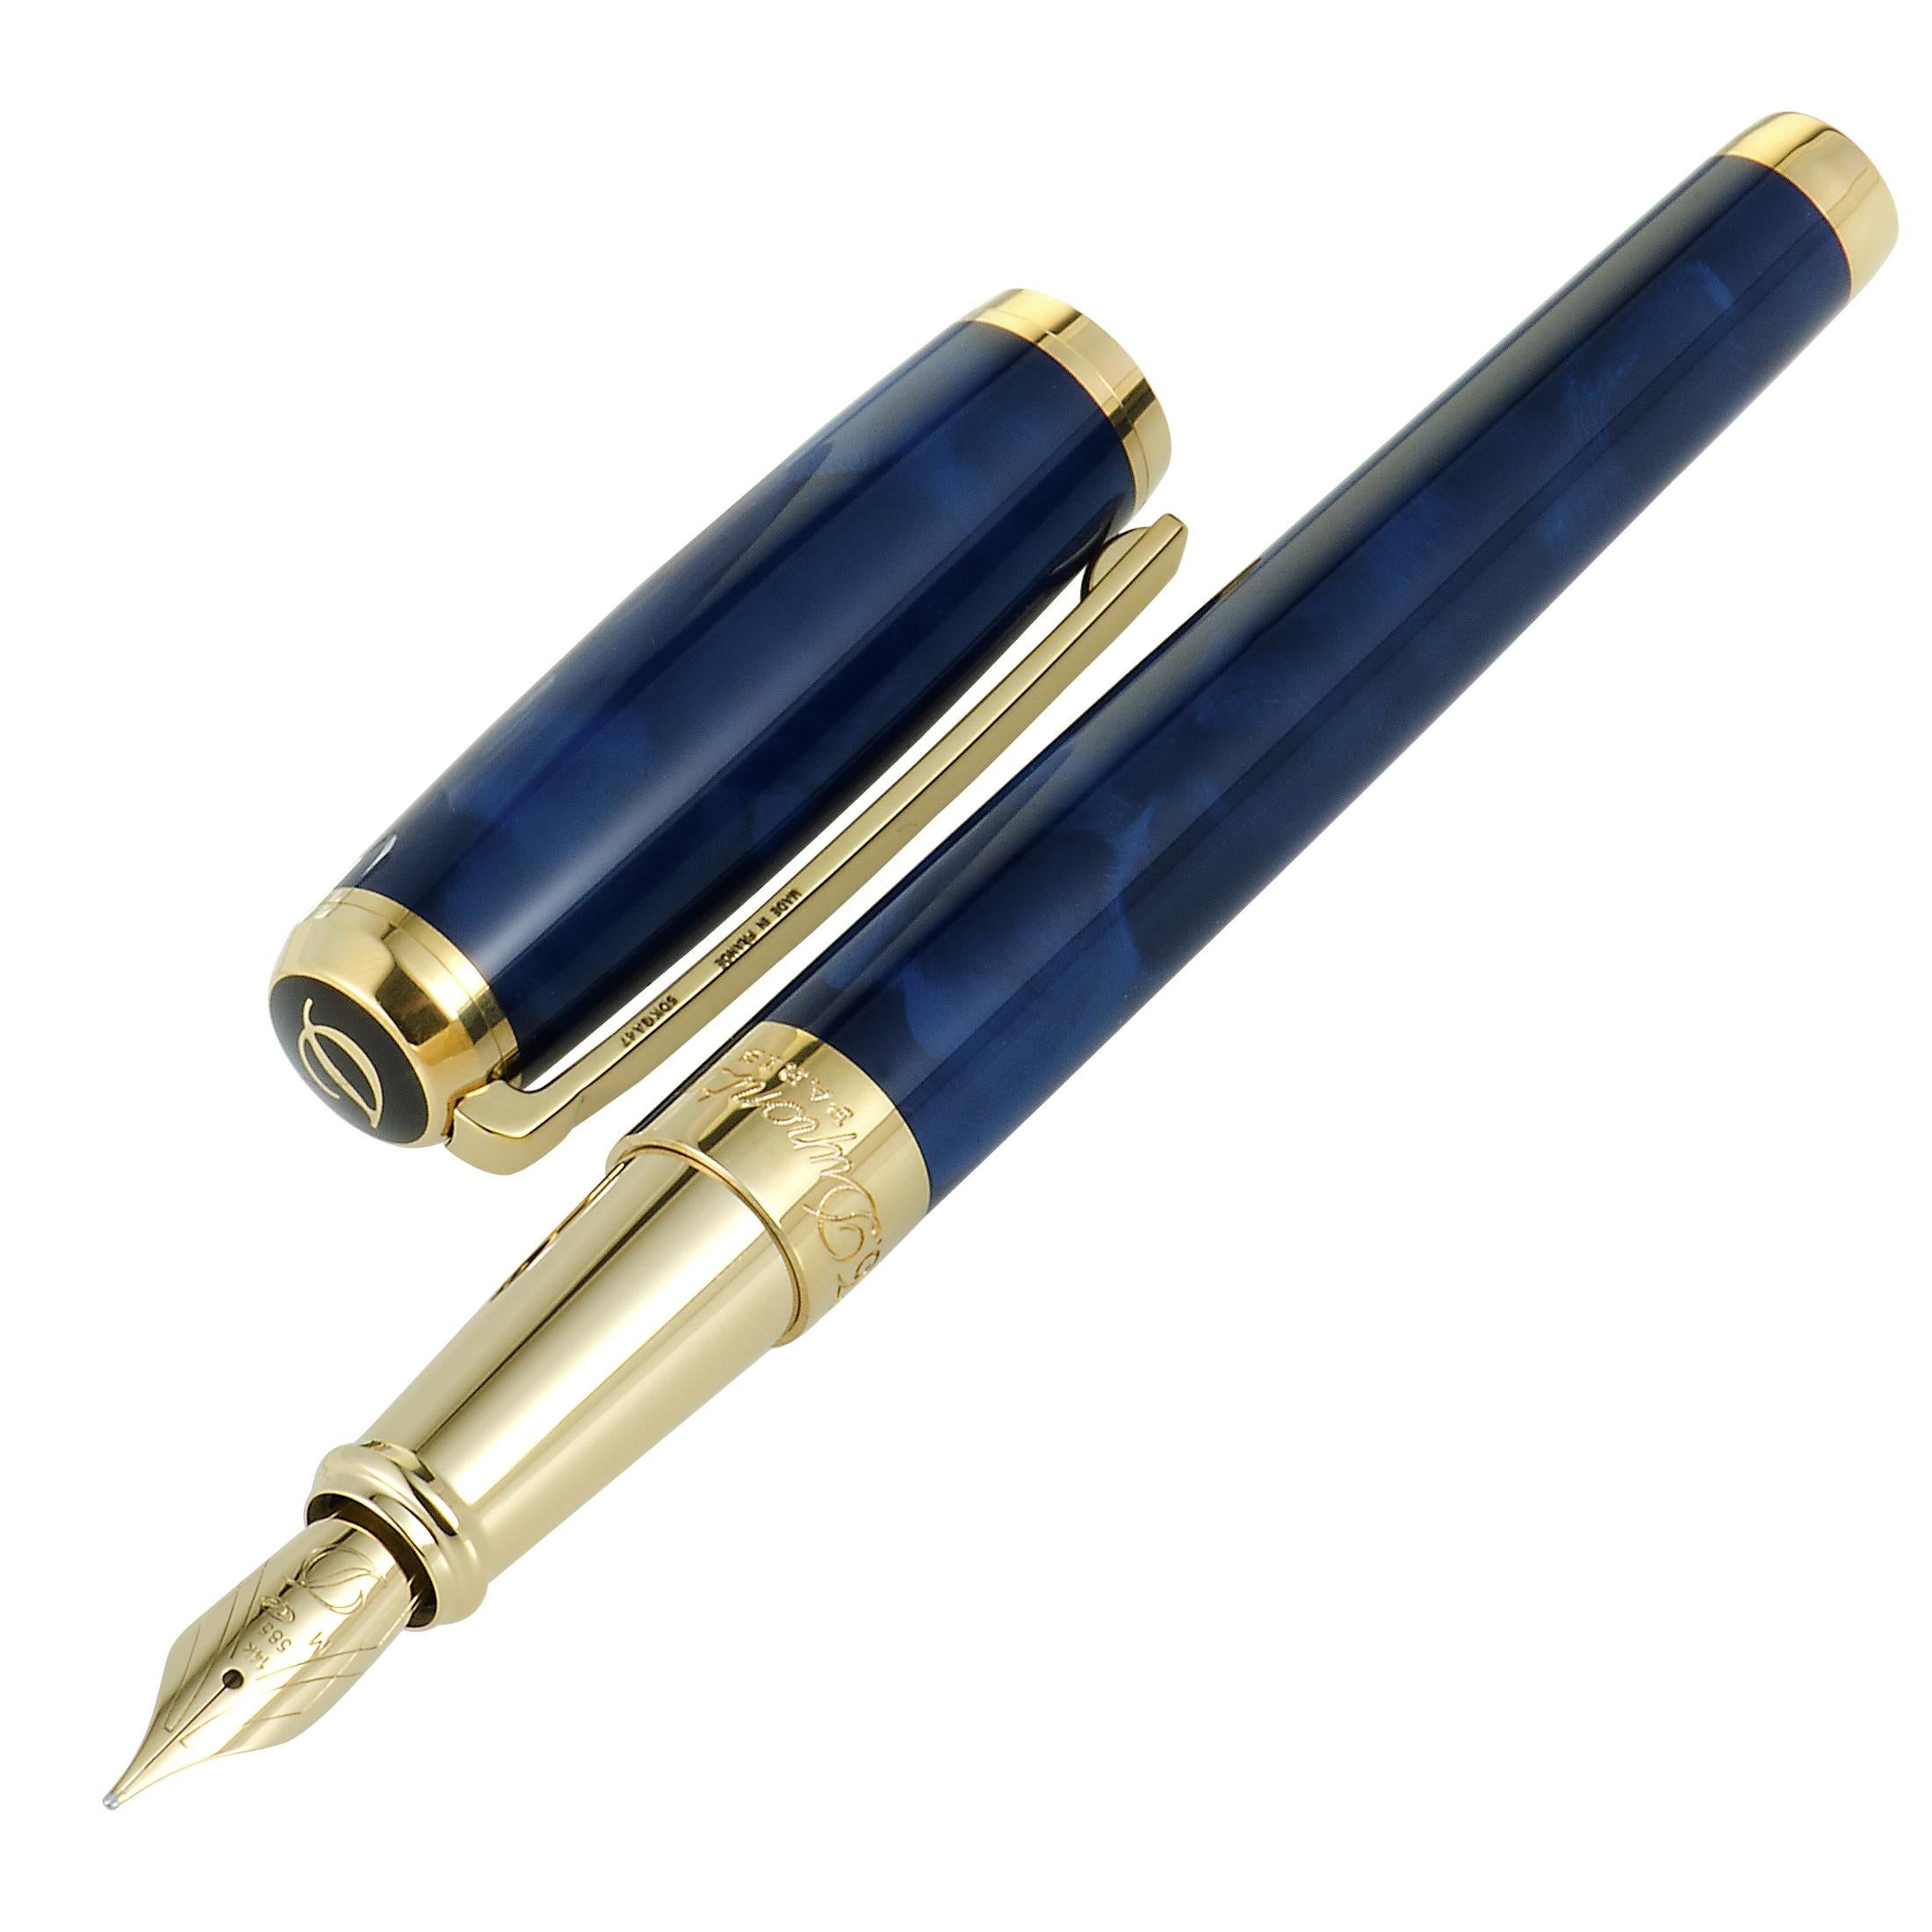 The exquisite blue lacquer is splendidly accentuated by the prestigious radiance in this exceptional fountain pen that boasts a solid 18K gold nib. The pen is created by S.T. Dupont within the sublime “Line D” line.